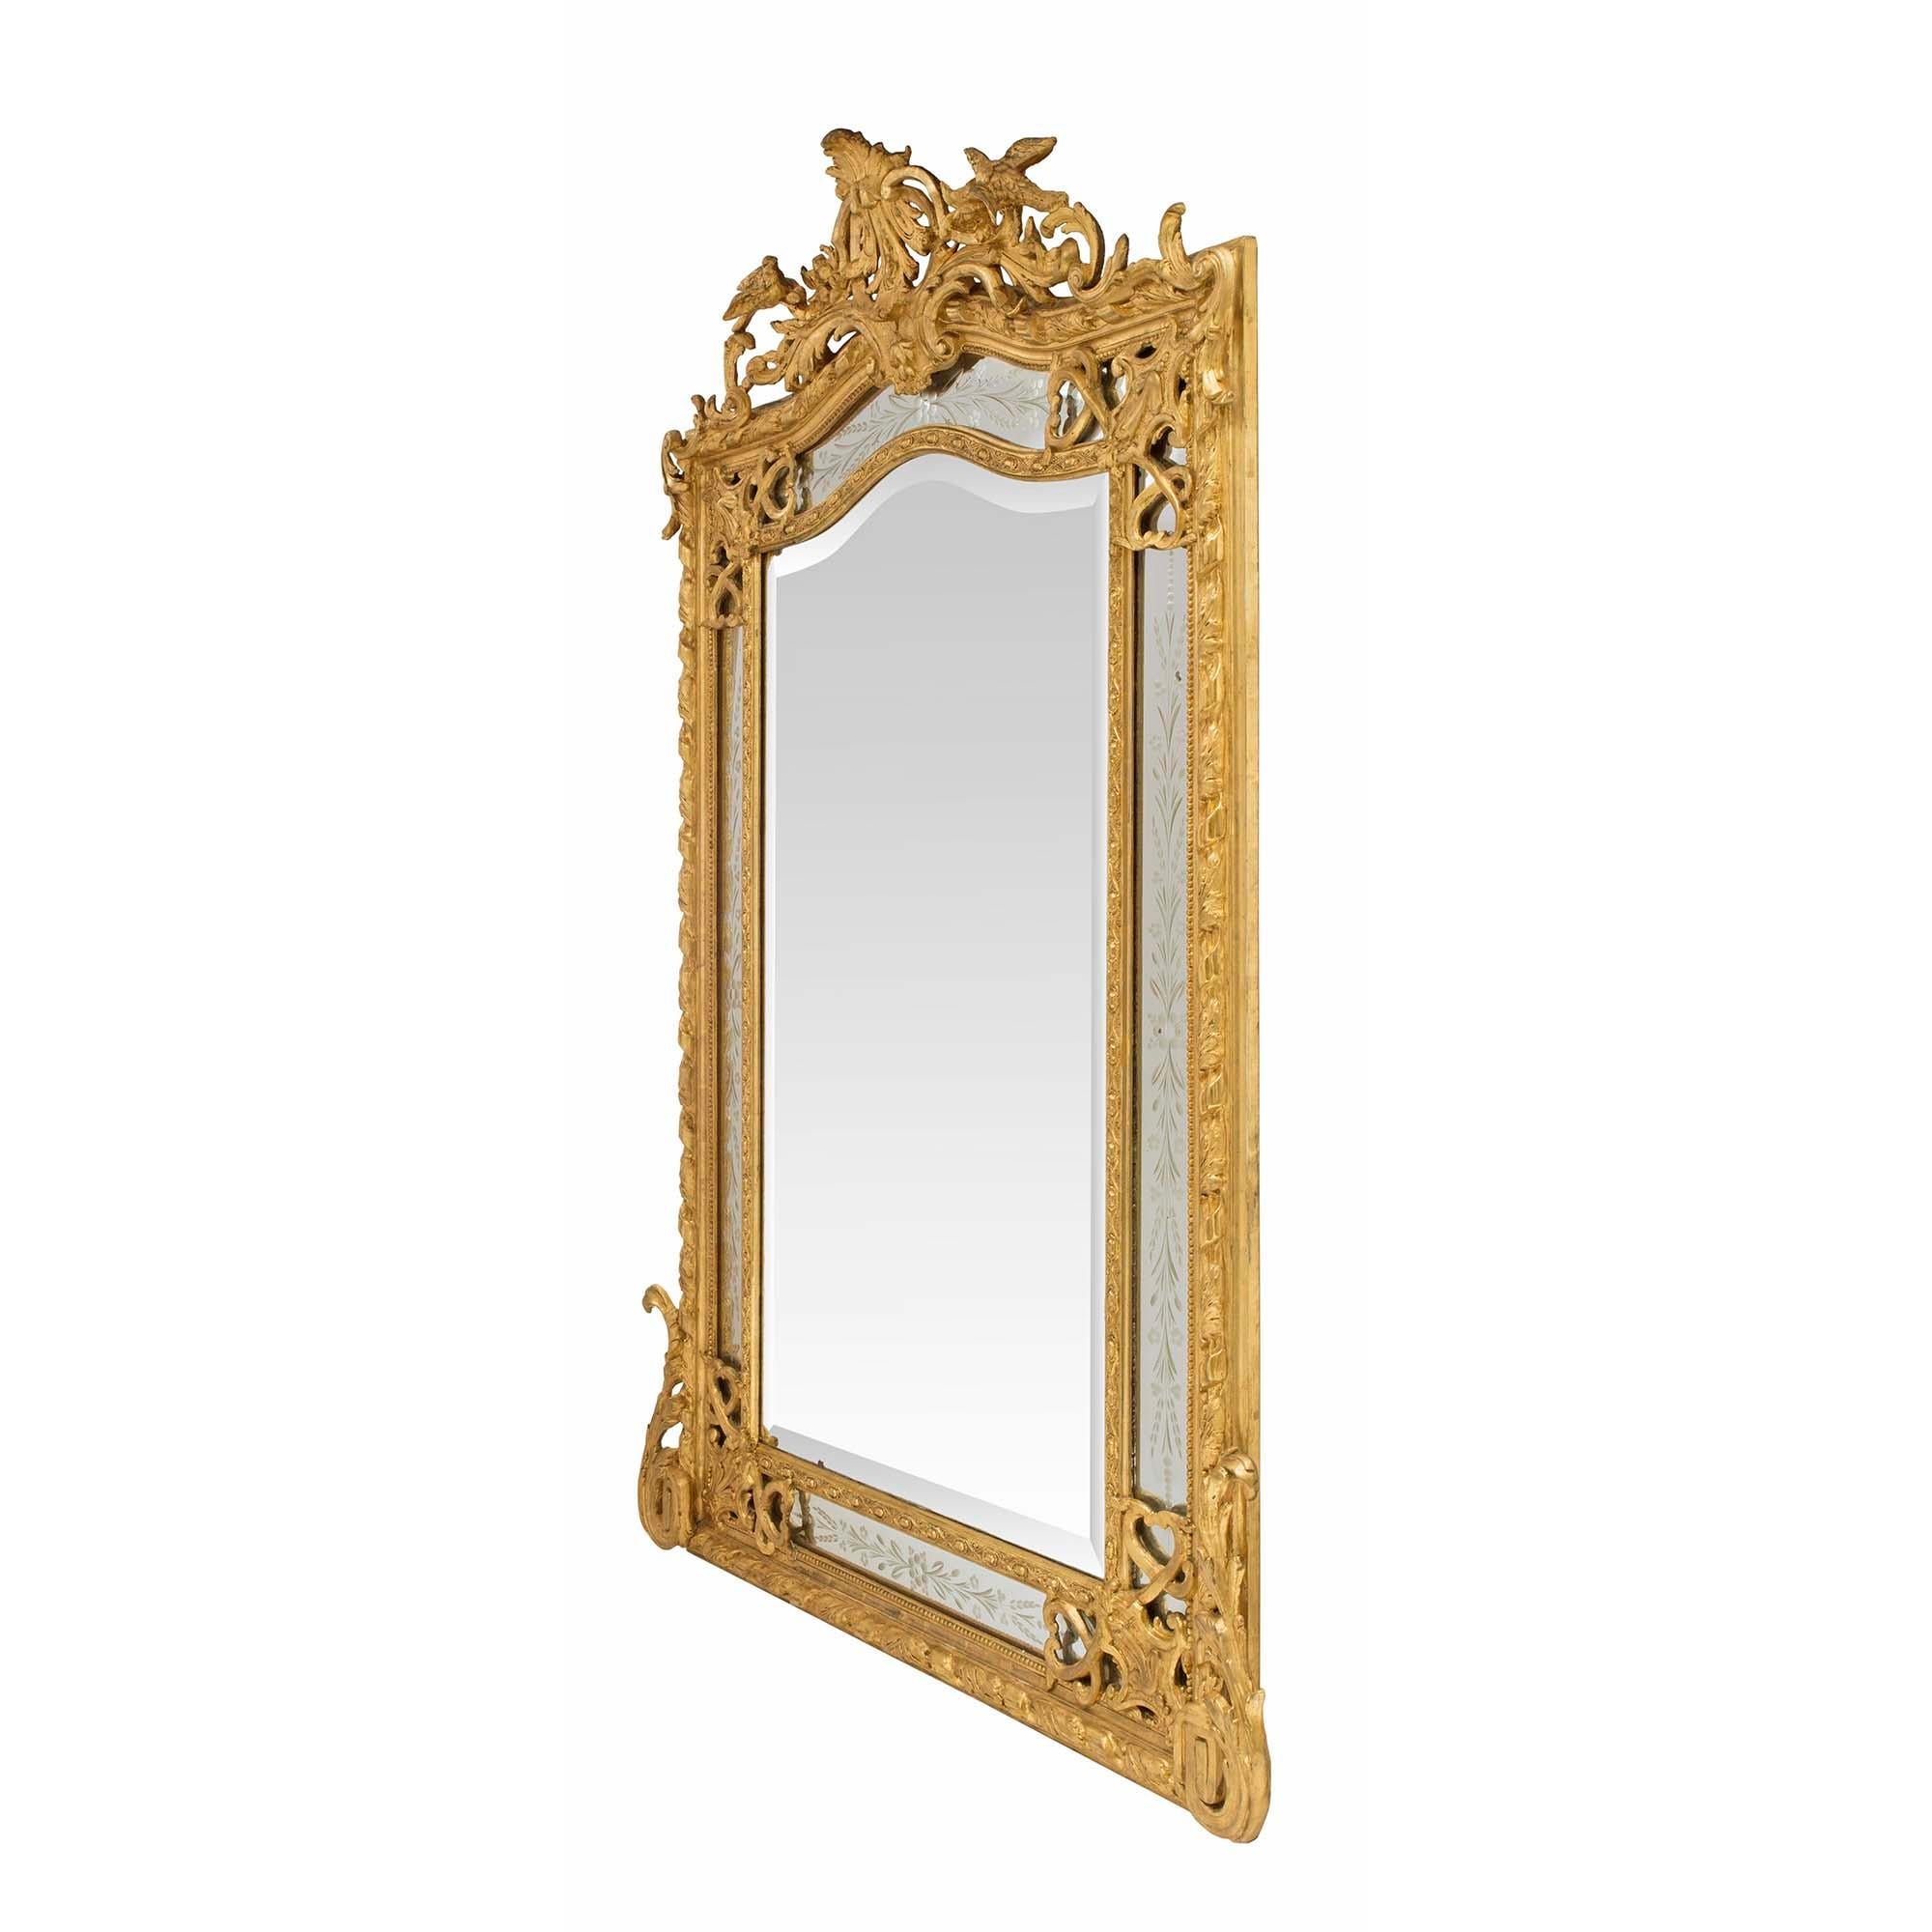 A beautiful French 19th century Louis XVI st. giltwood double framed mirror. The original central beveled mirror plate which follows the shape of the mirror is framed within a fine carved and beaded border. Leading out are the original and most